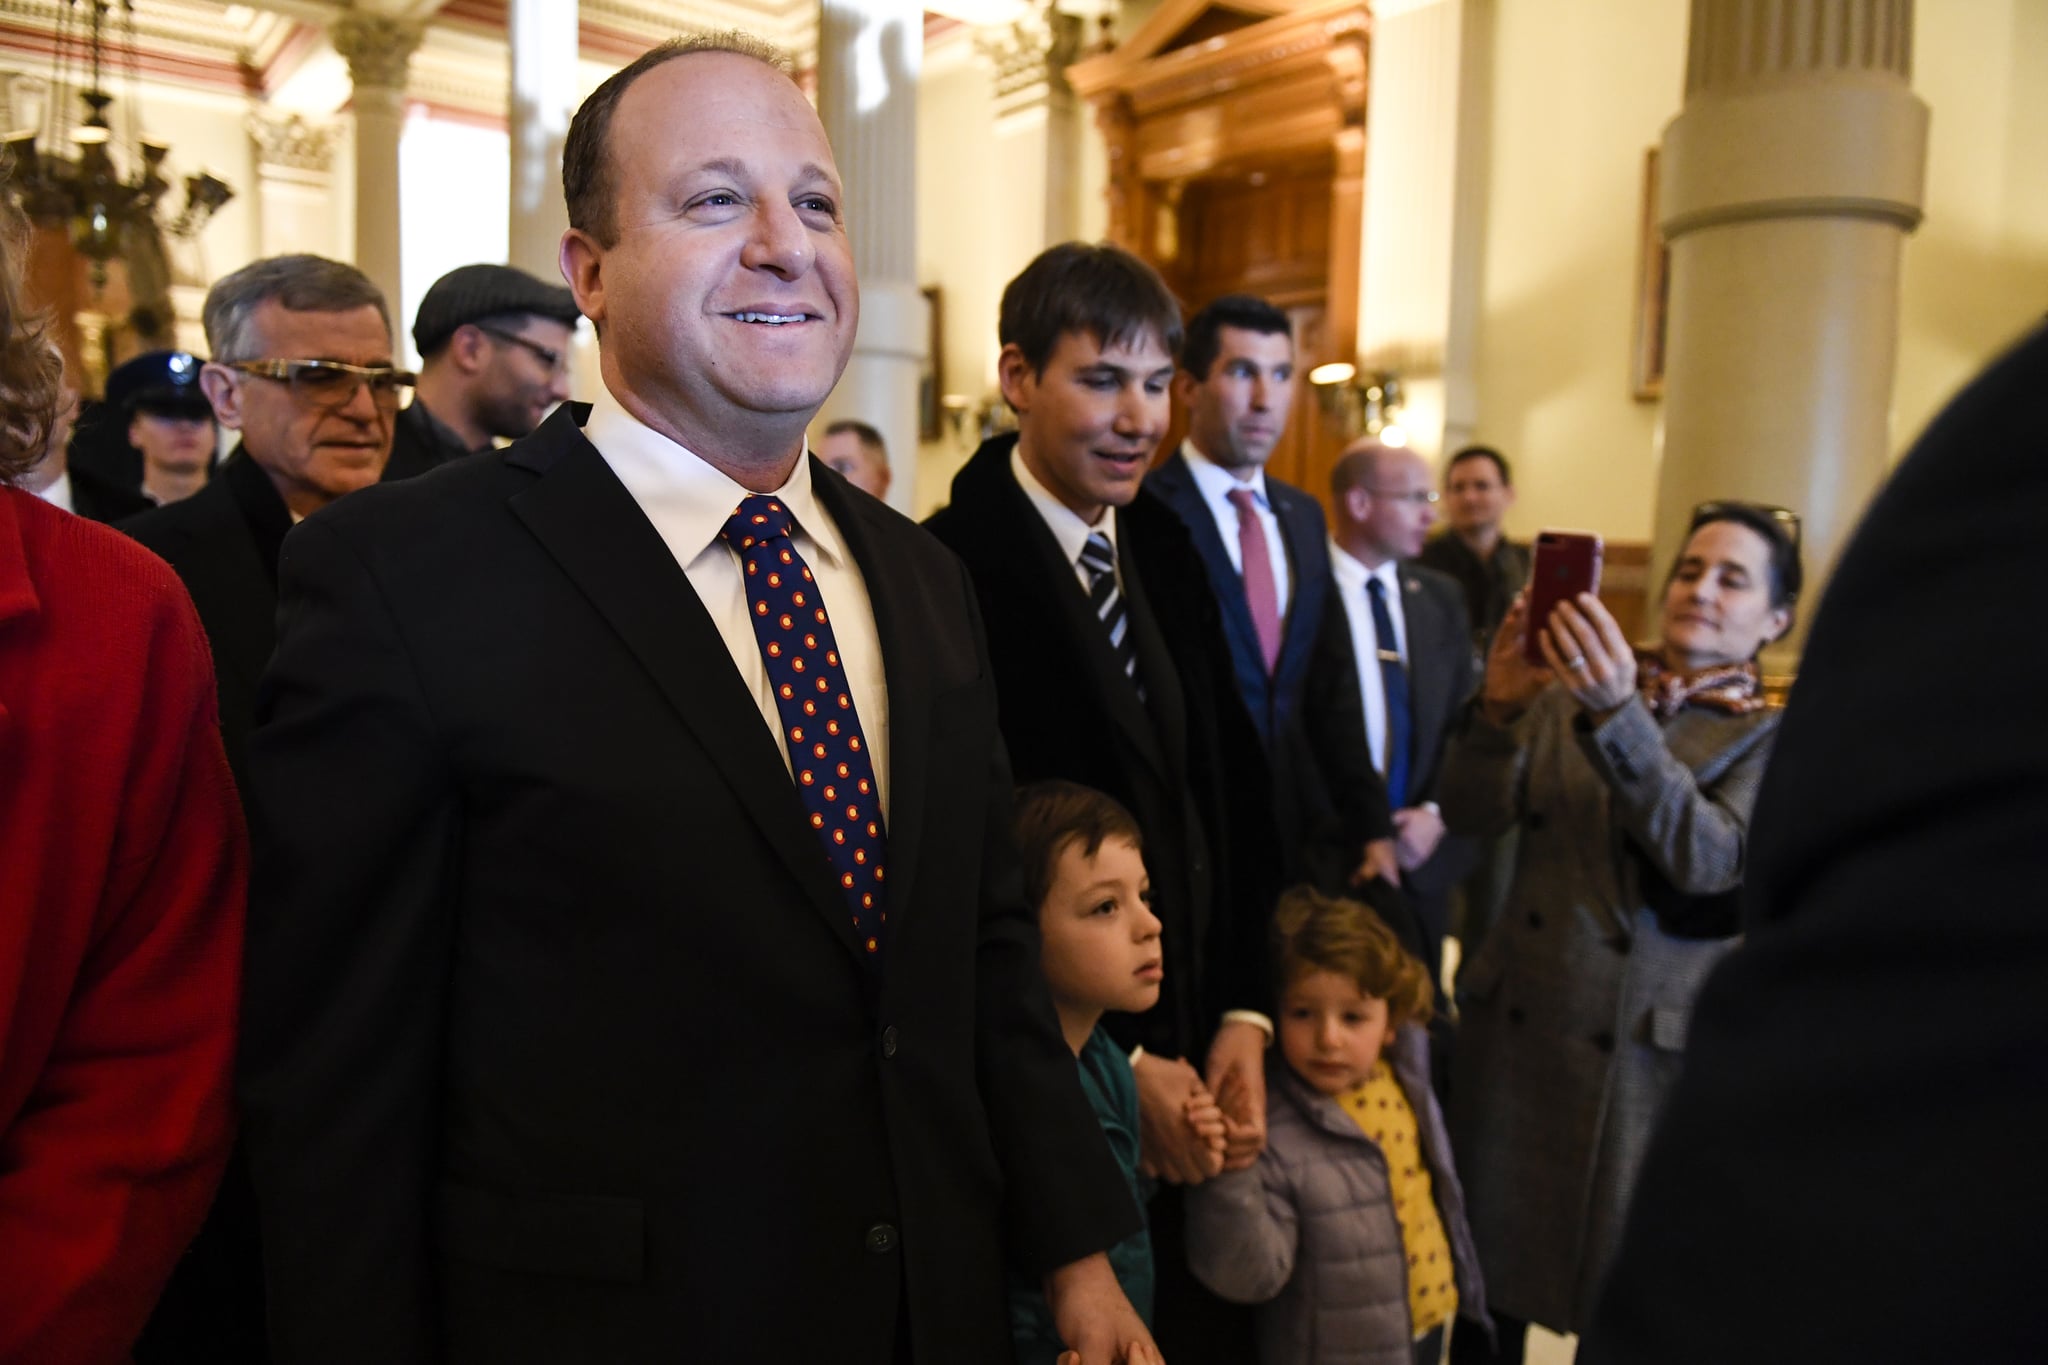 DENVER, CO - JANUARY 8: Governor-elect Jared Polis stands with his partner, Marlon Reis, and their children, Cora and Caspian, in the west wing before his inauguration at the Colorado State Capitol on Tuesday, January 8, 2019. (Photo by AAron Ontiveroz/The Denver Post via Getty Images)